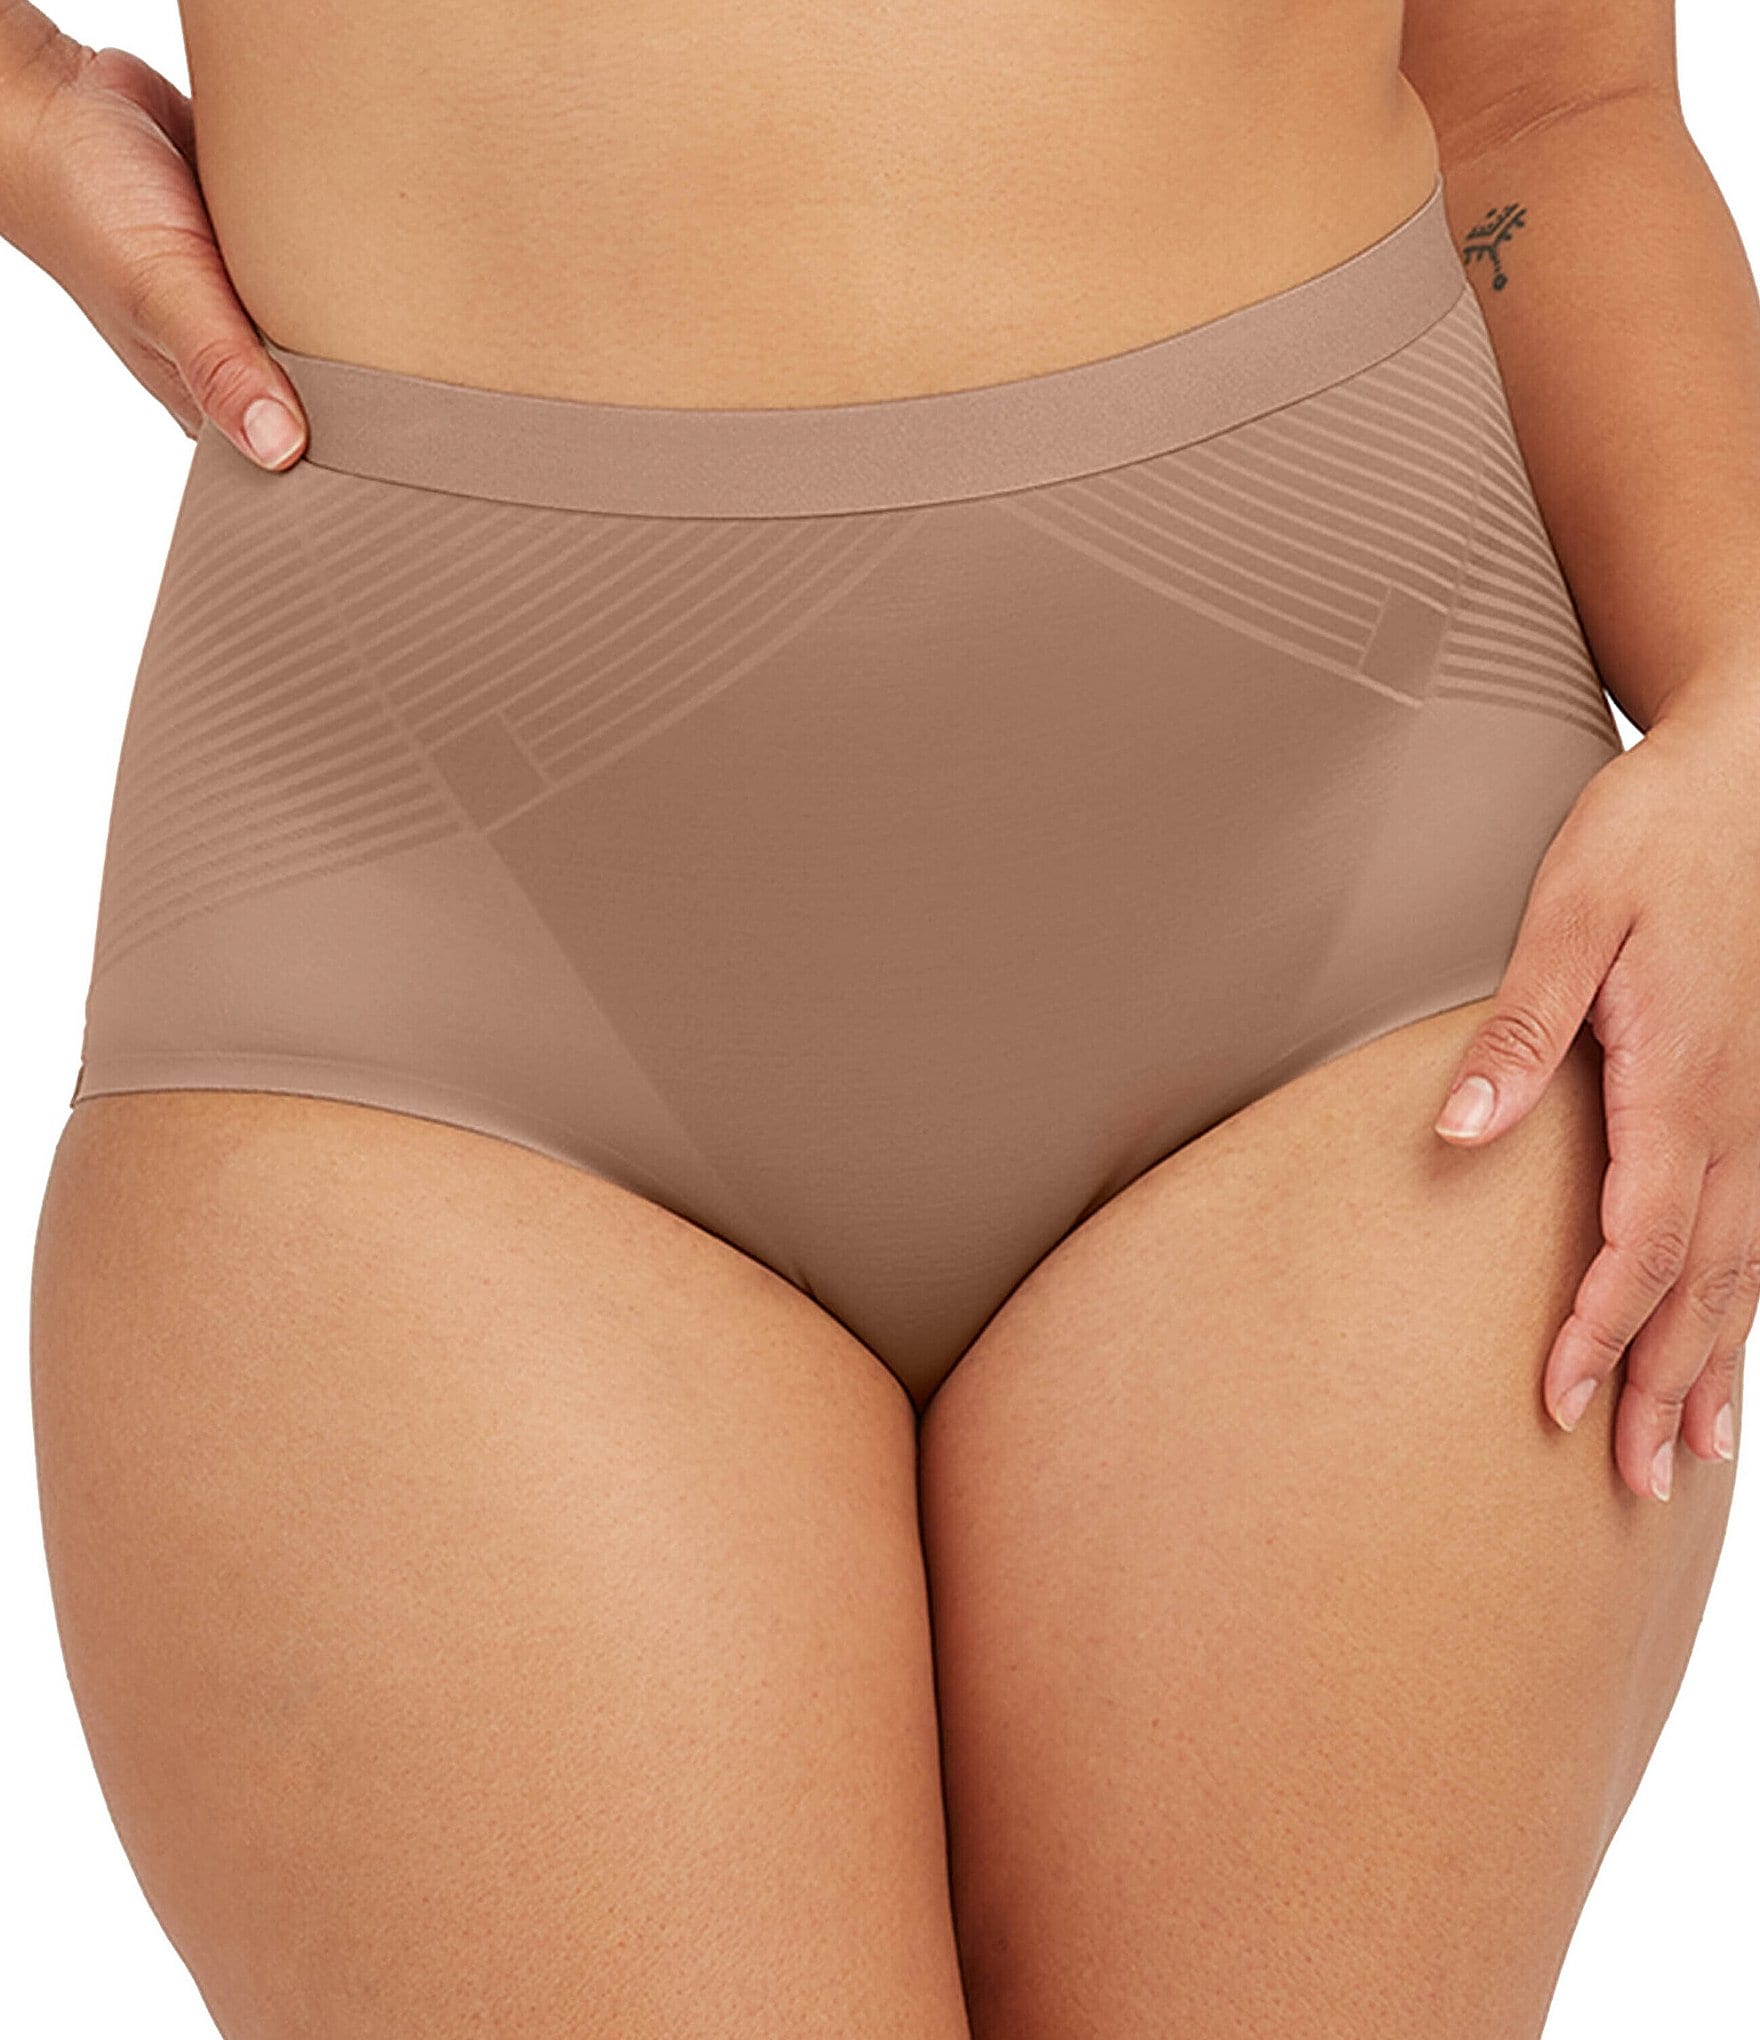 Spanx shapewear is reduced on  tummy control shorts, panties